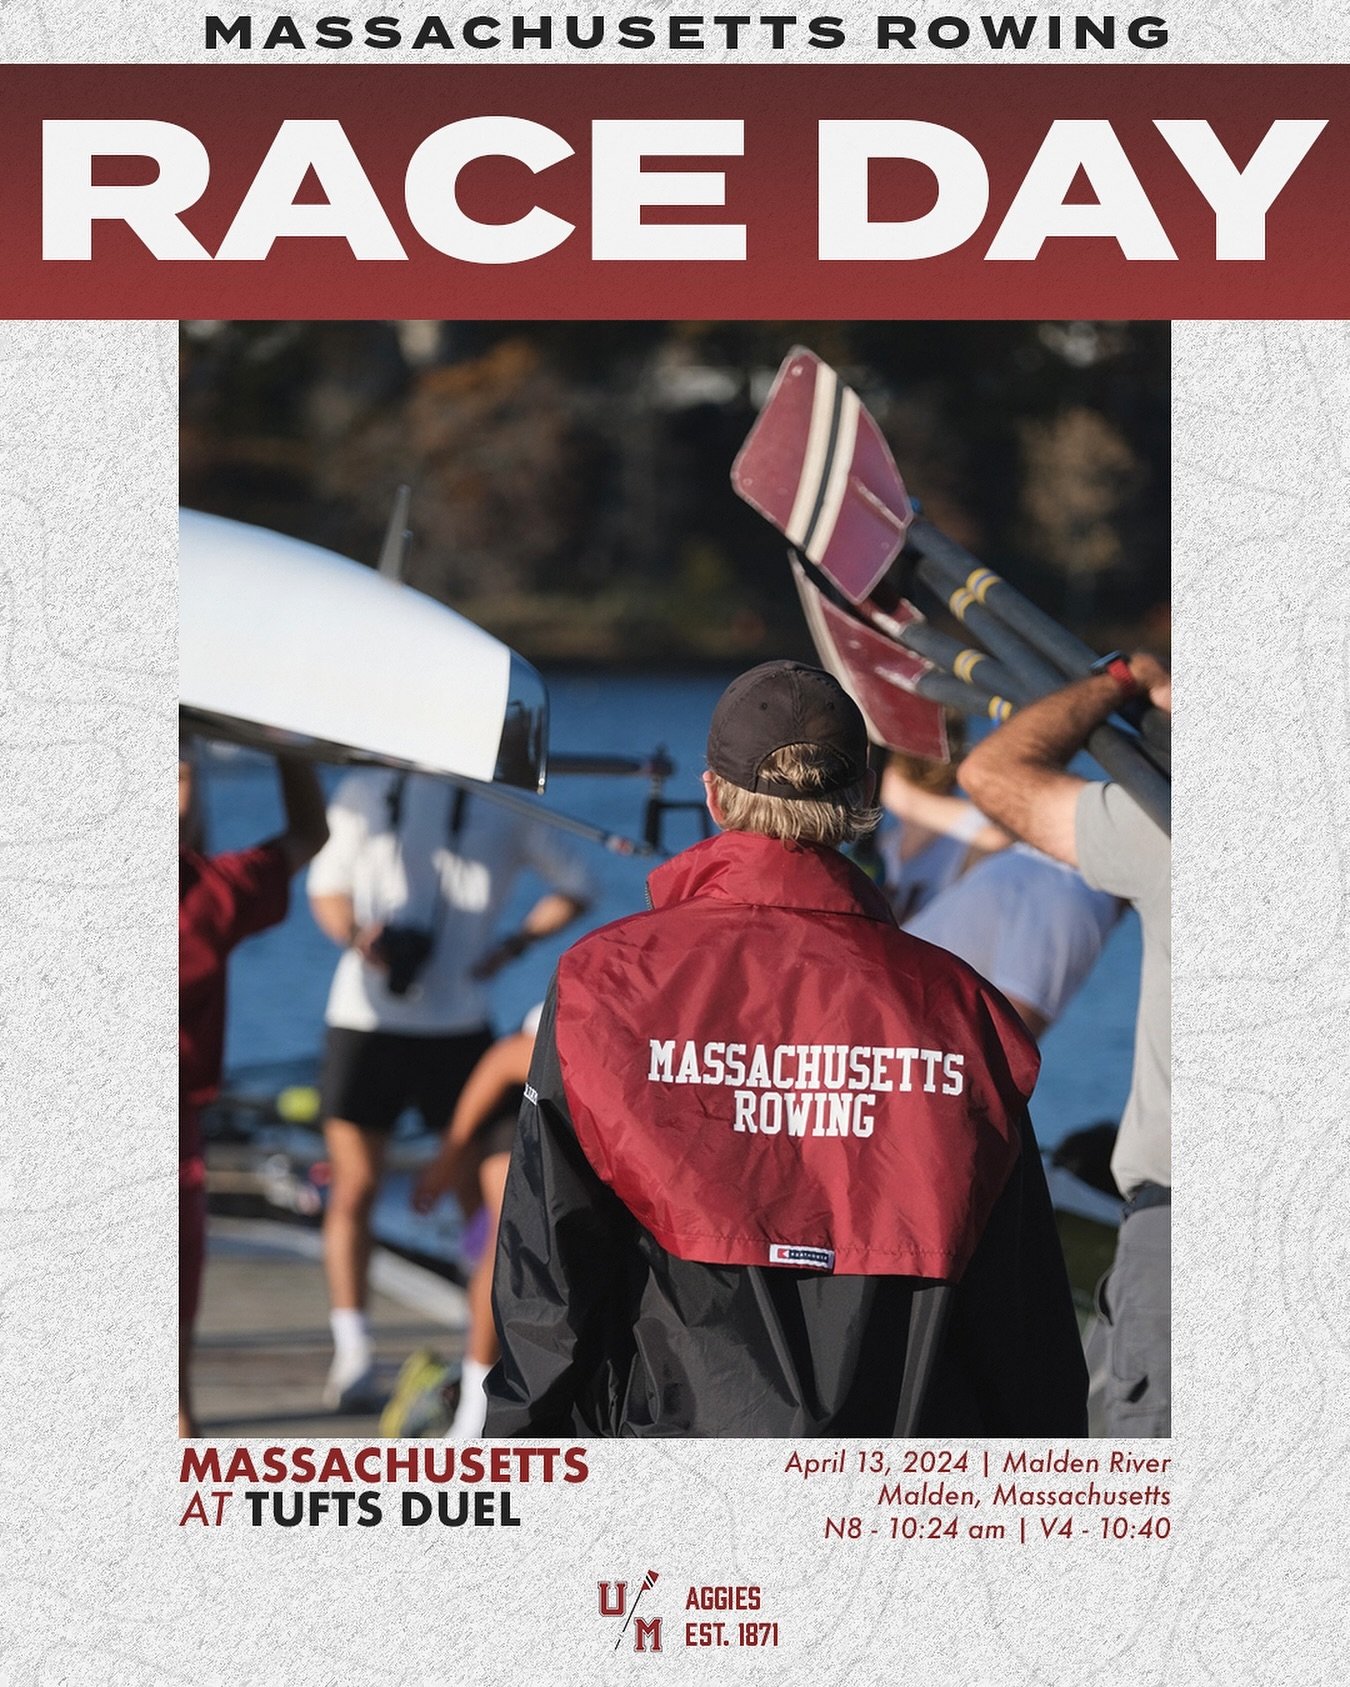 🚨SEASON OPENER🚨

This Saturday, the Aggies take to the Malden River to open up their season at Tufts. Go Aggies!
.
.
.
#umass #massachusetts #rowing @umass